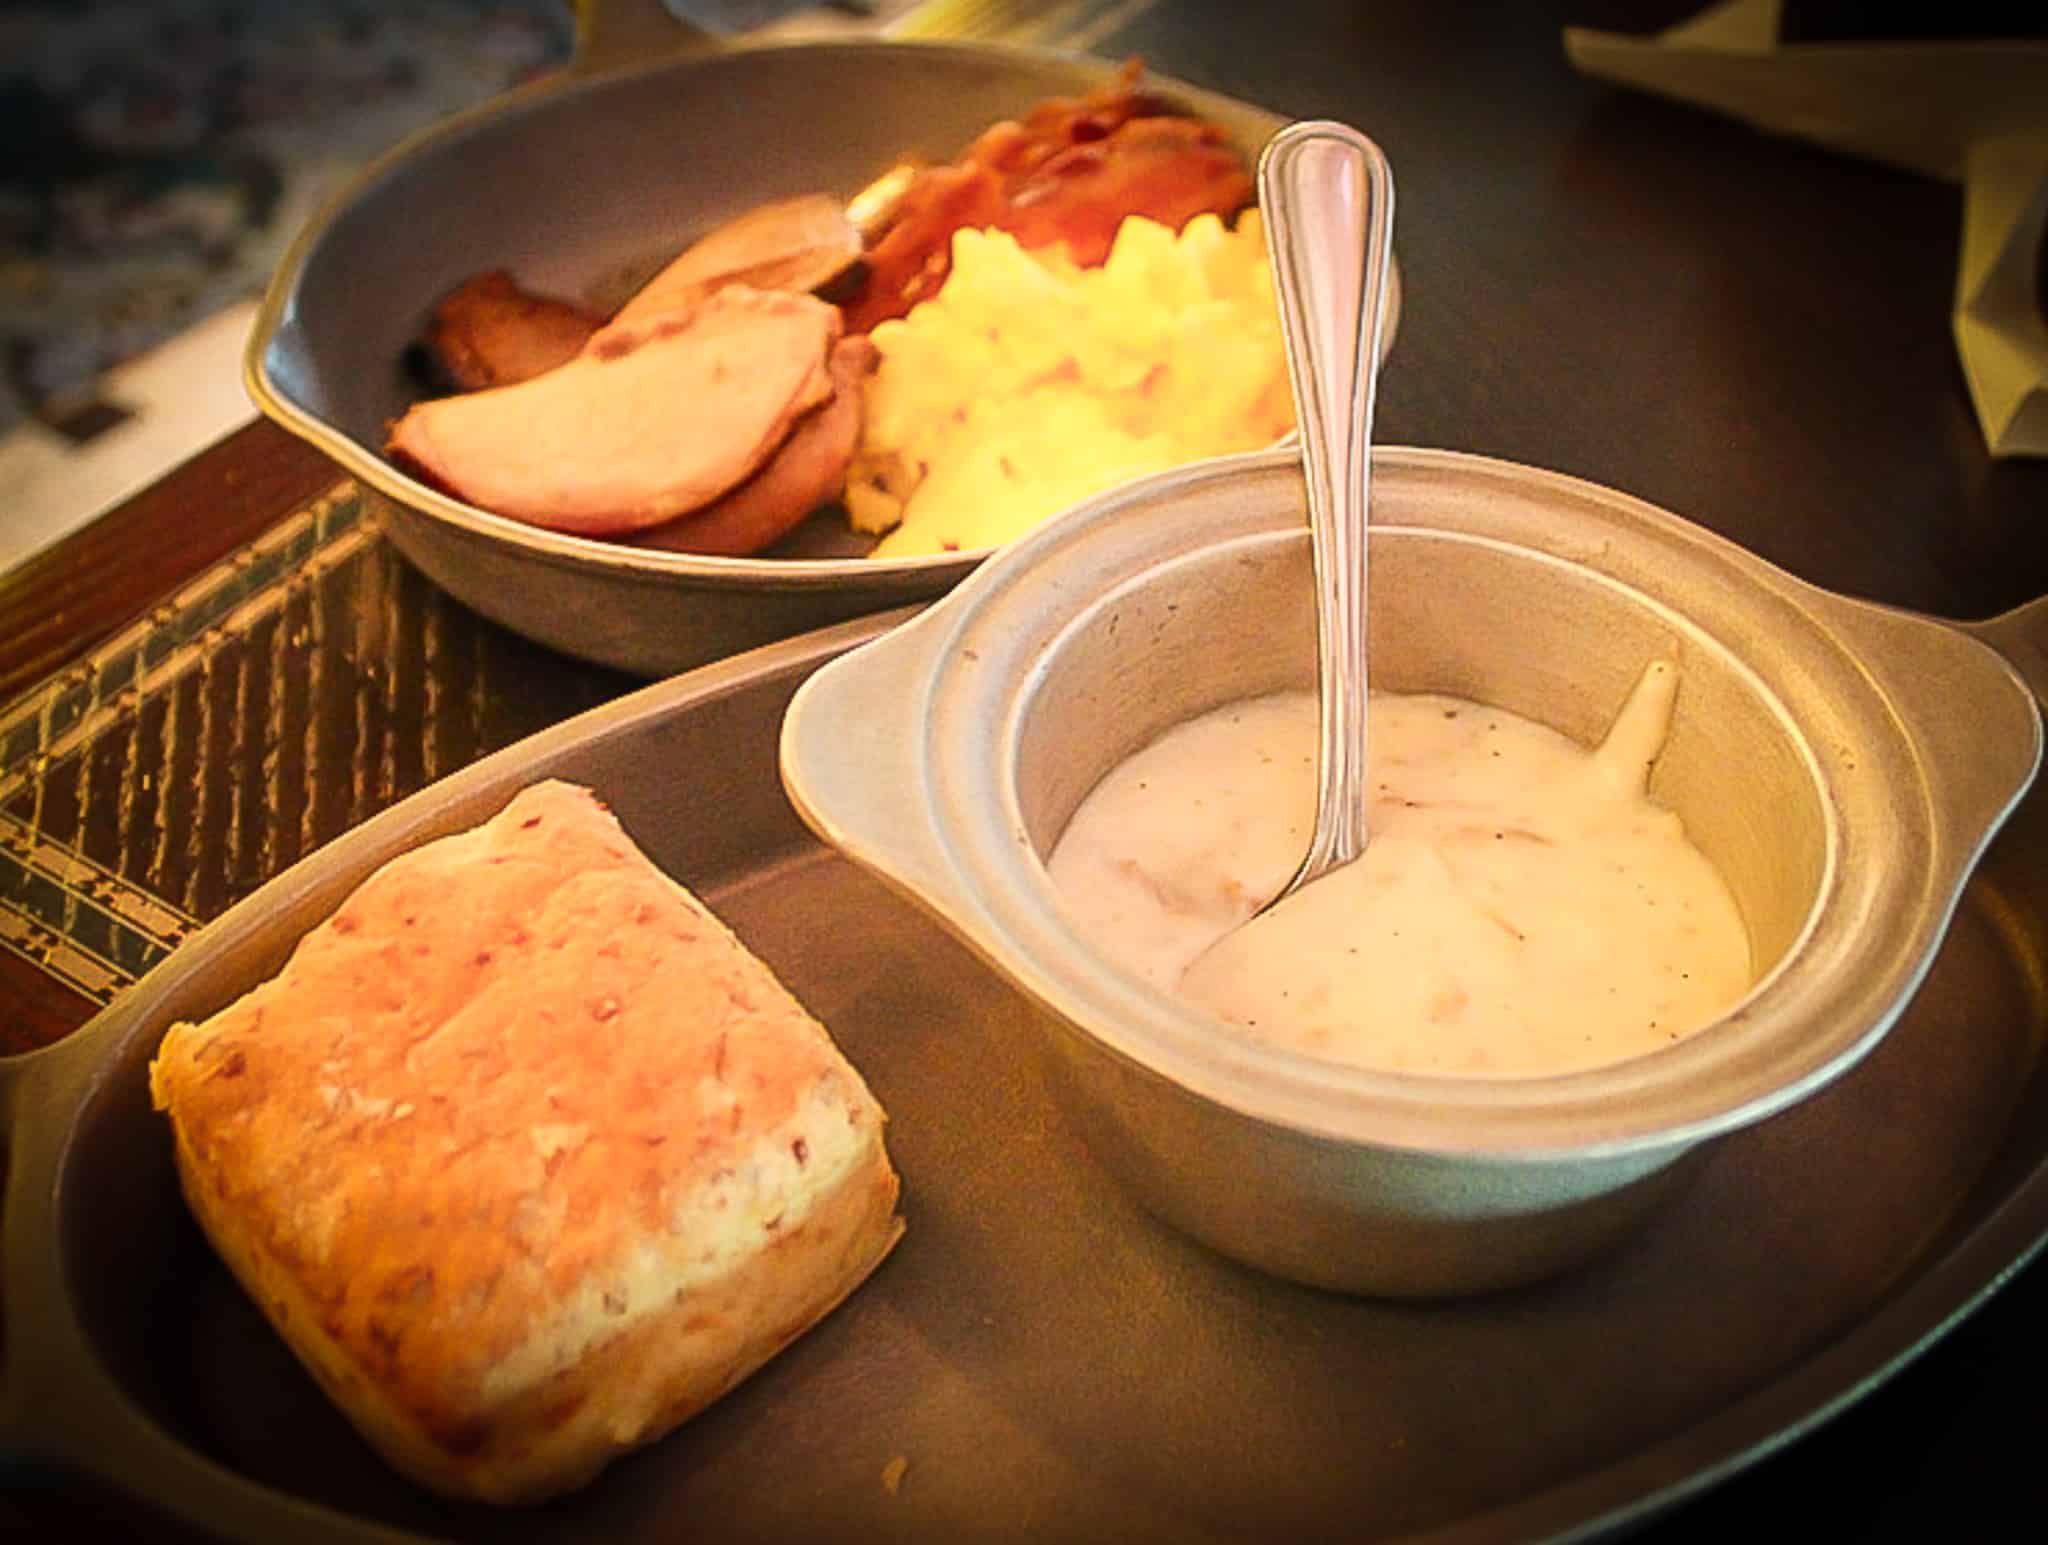 biscuits, gravy, and a breakfast skillet with various meats